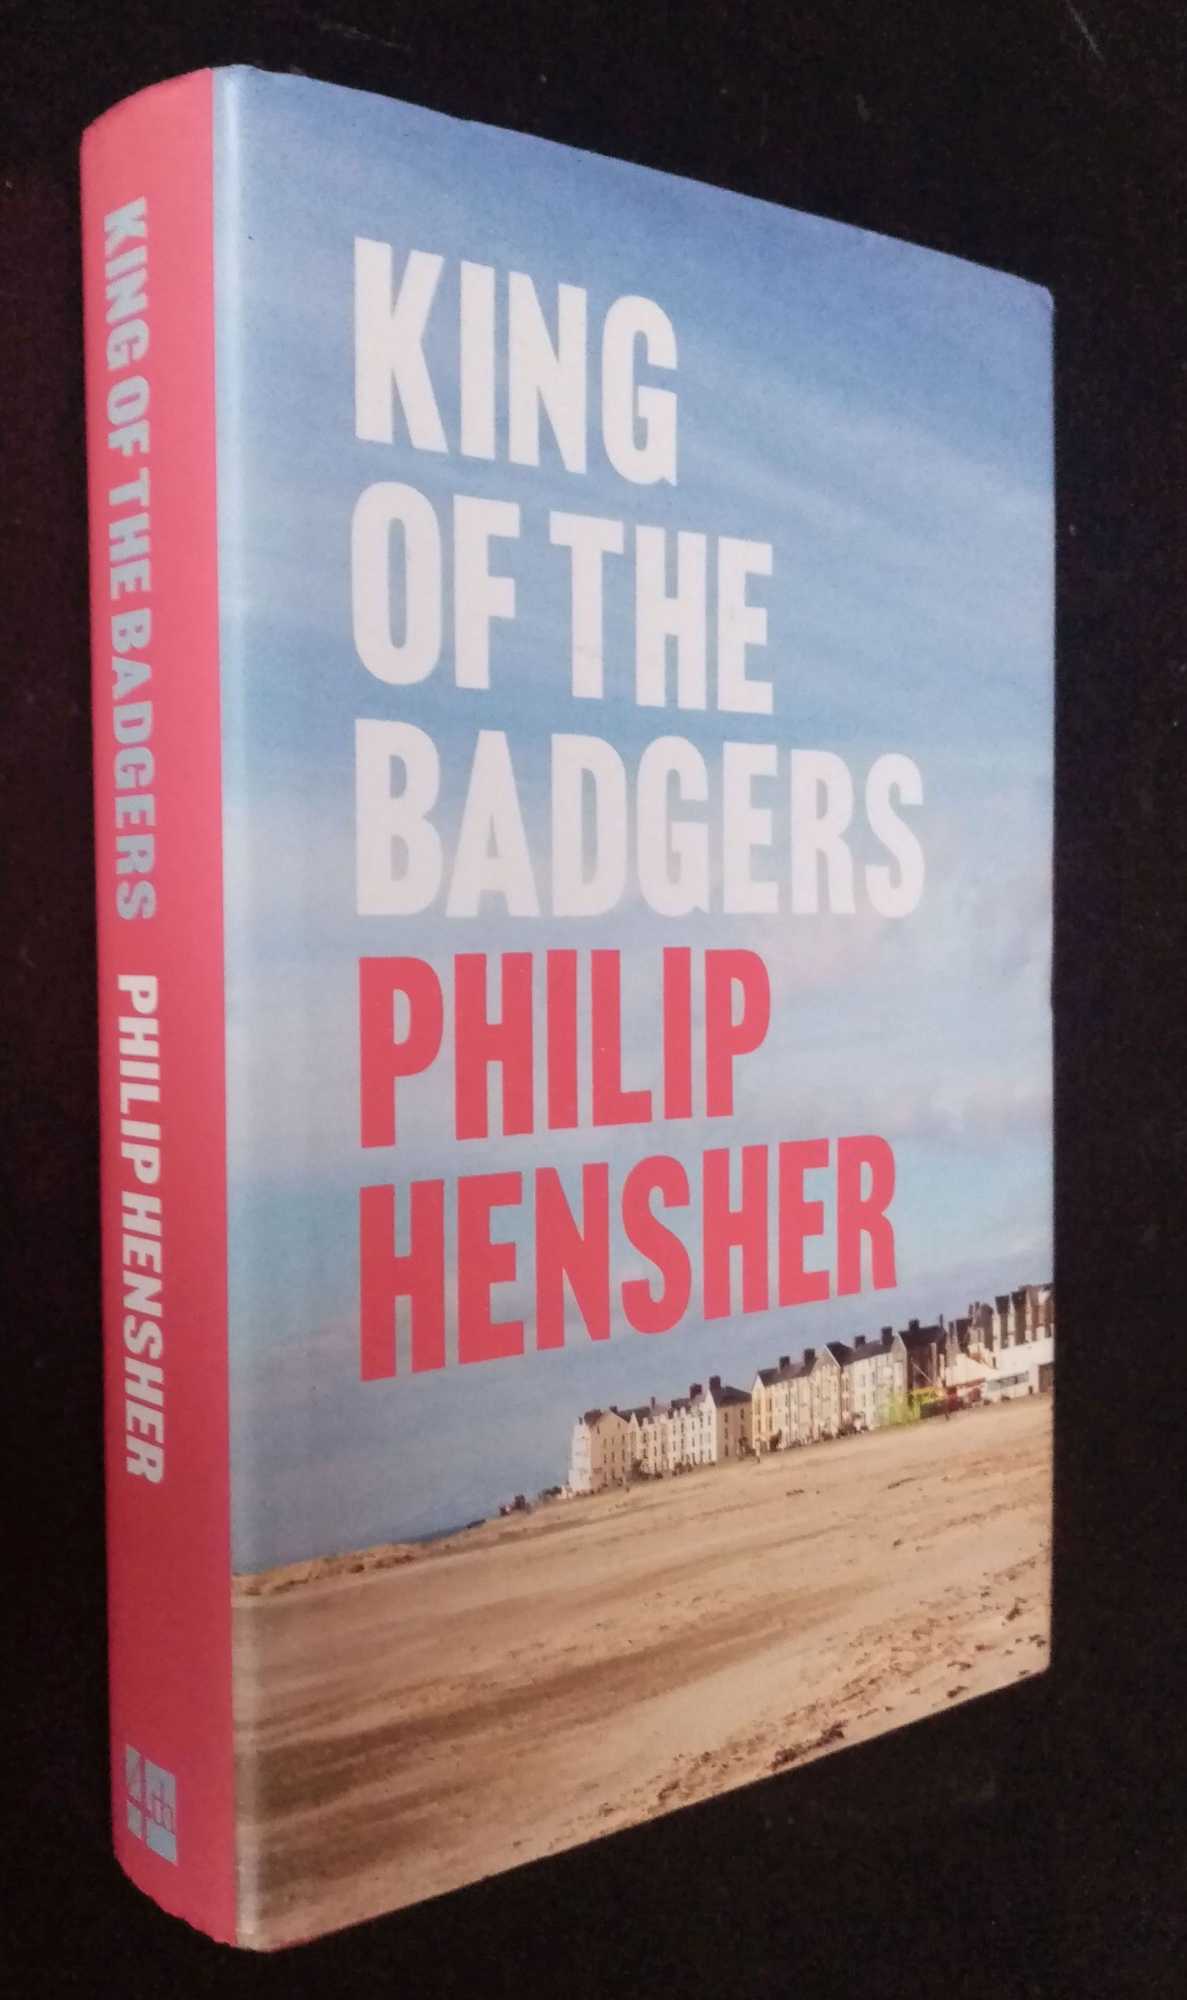 Philip Hensher - King of the Badgers   SIGNED